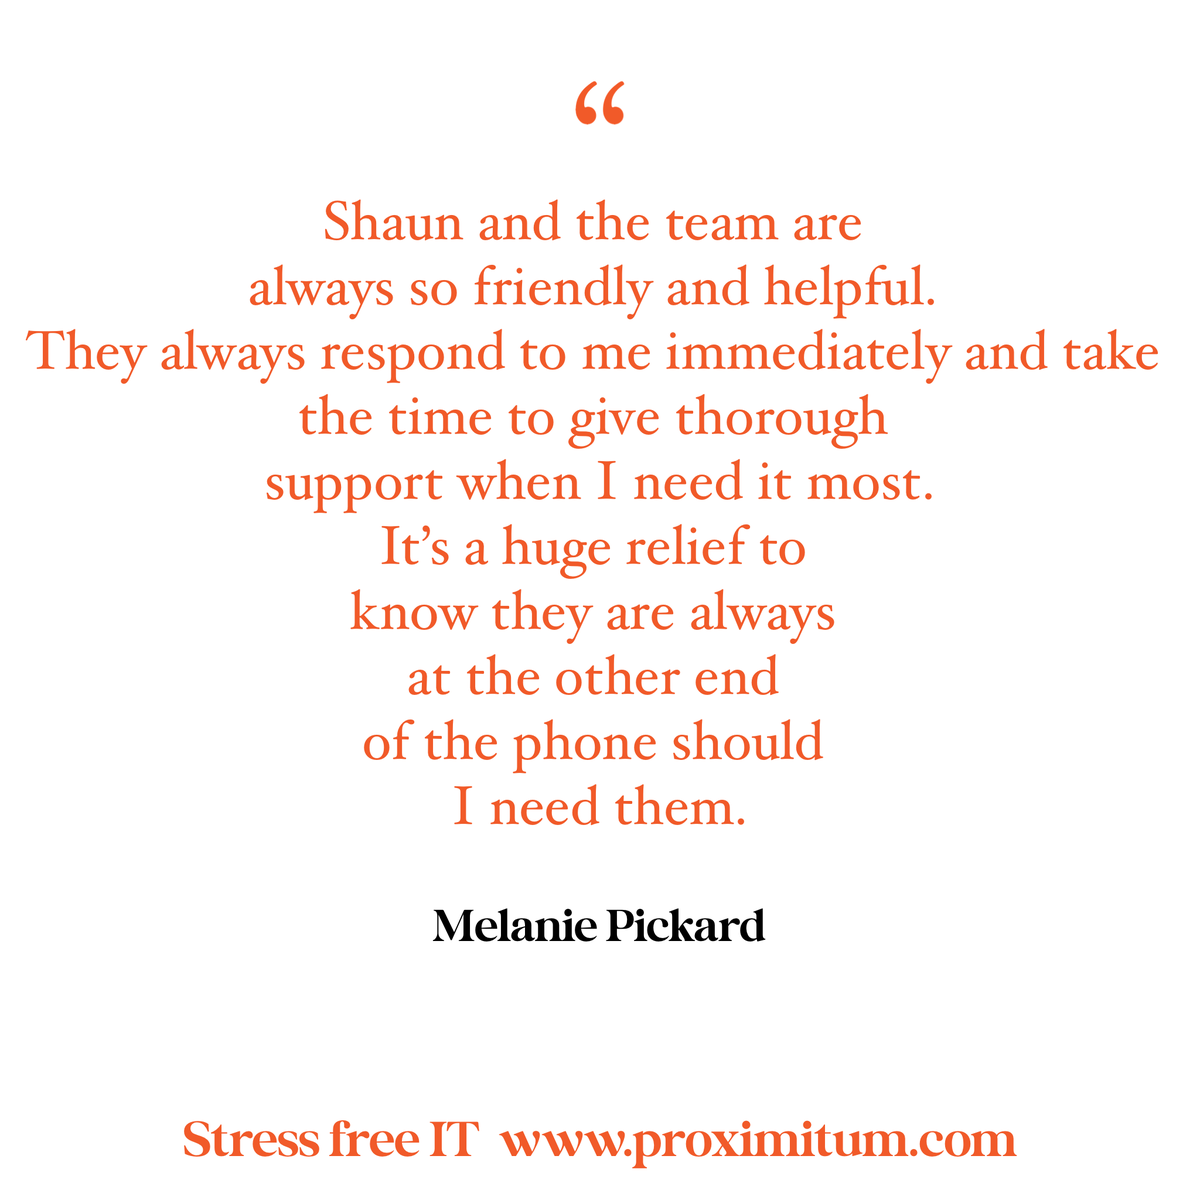 Some lovely feedback, thank you.

We know how stressful it can be when you suddenly have an IT issue and need instant support.

#BusinessSupport #KentBusiness #SurreyBusiness #LondonBusiness #ITSupport #RemoteITSupport #OnsiteITSupport #NetworkSupport #BackupSystems